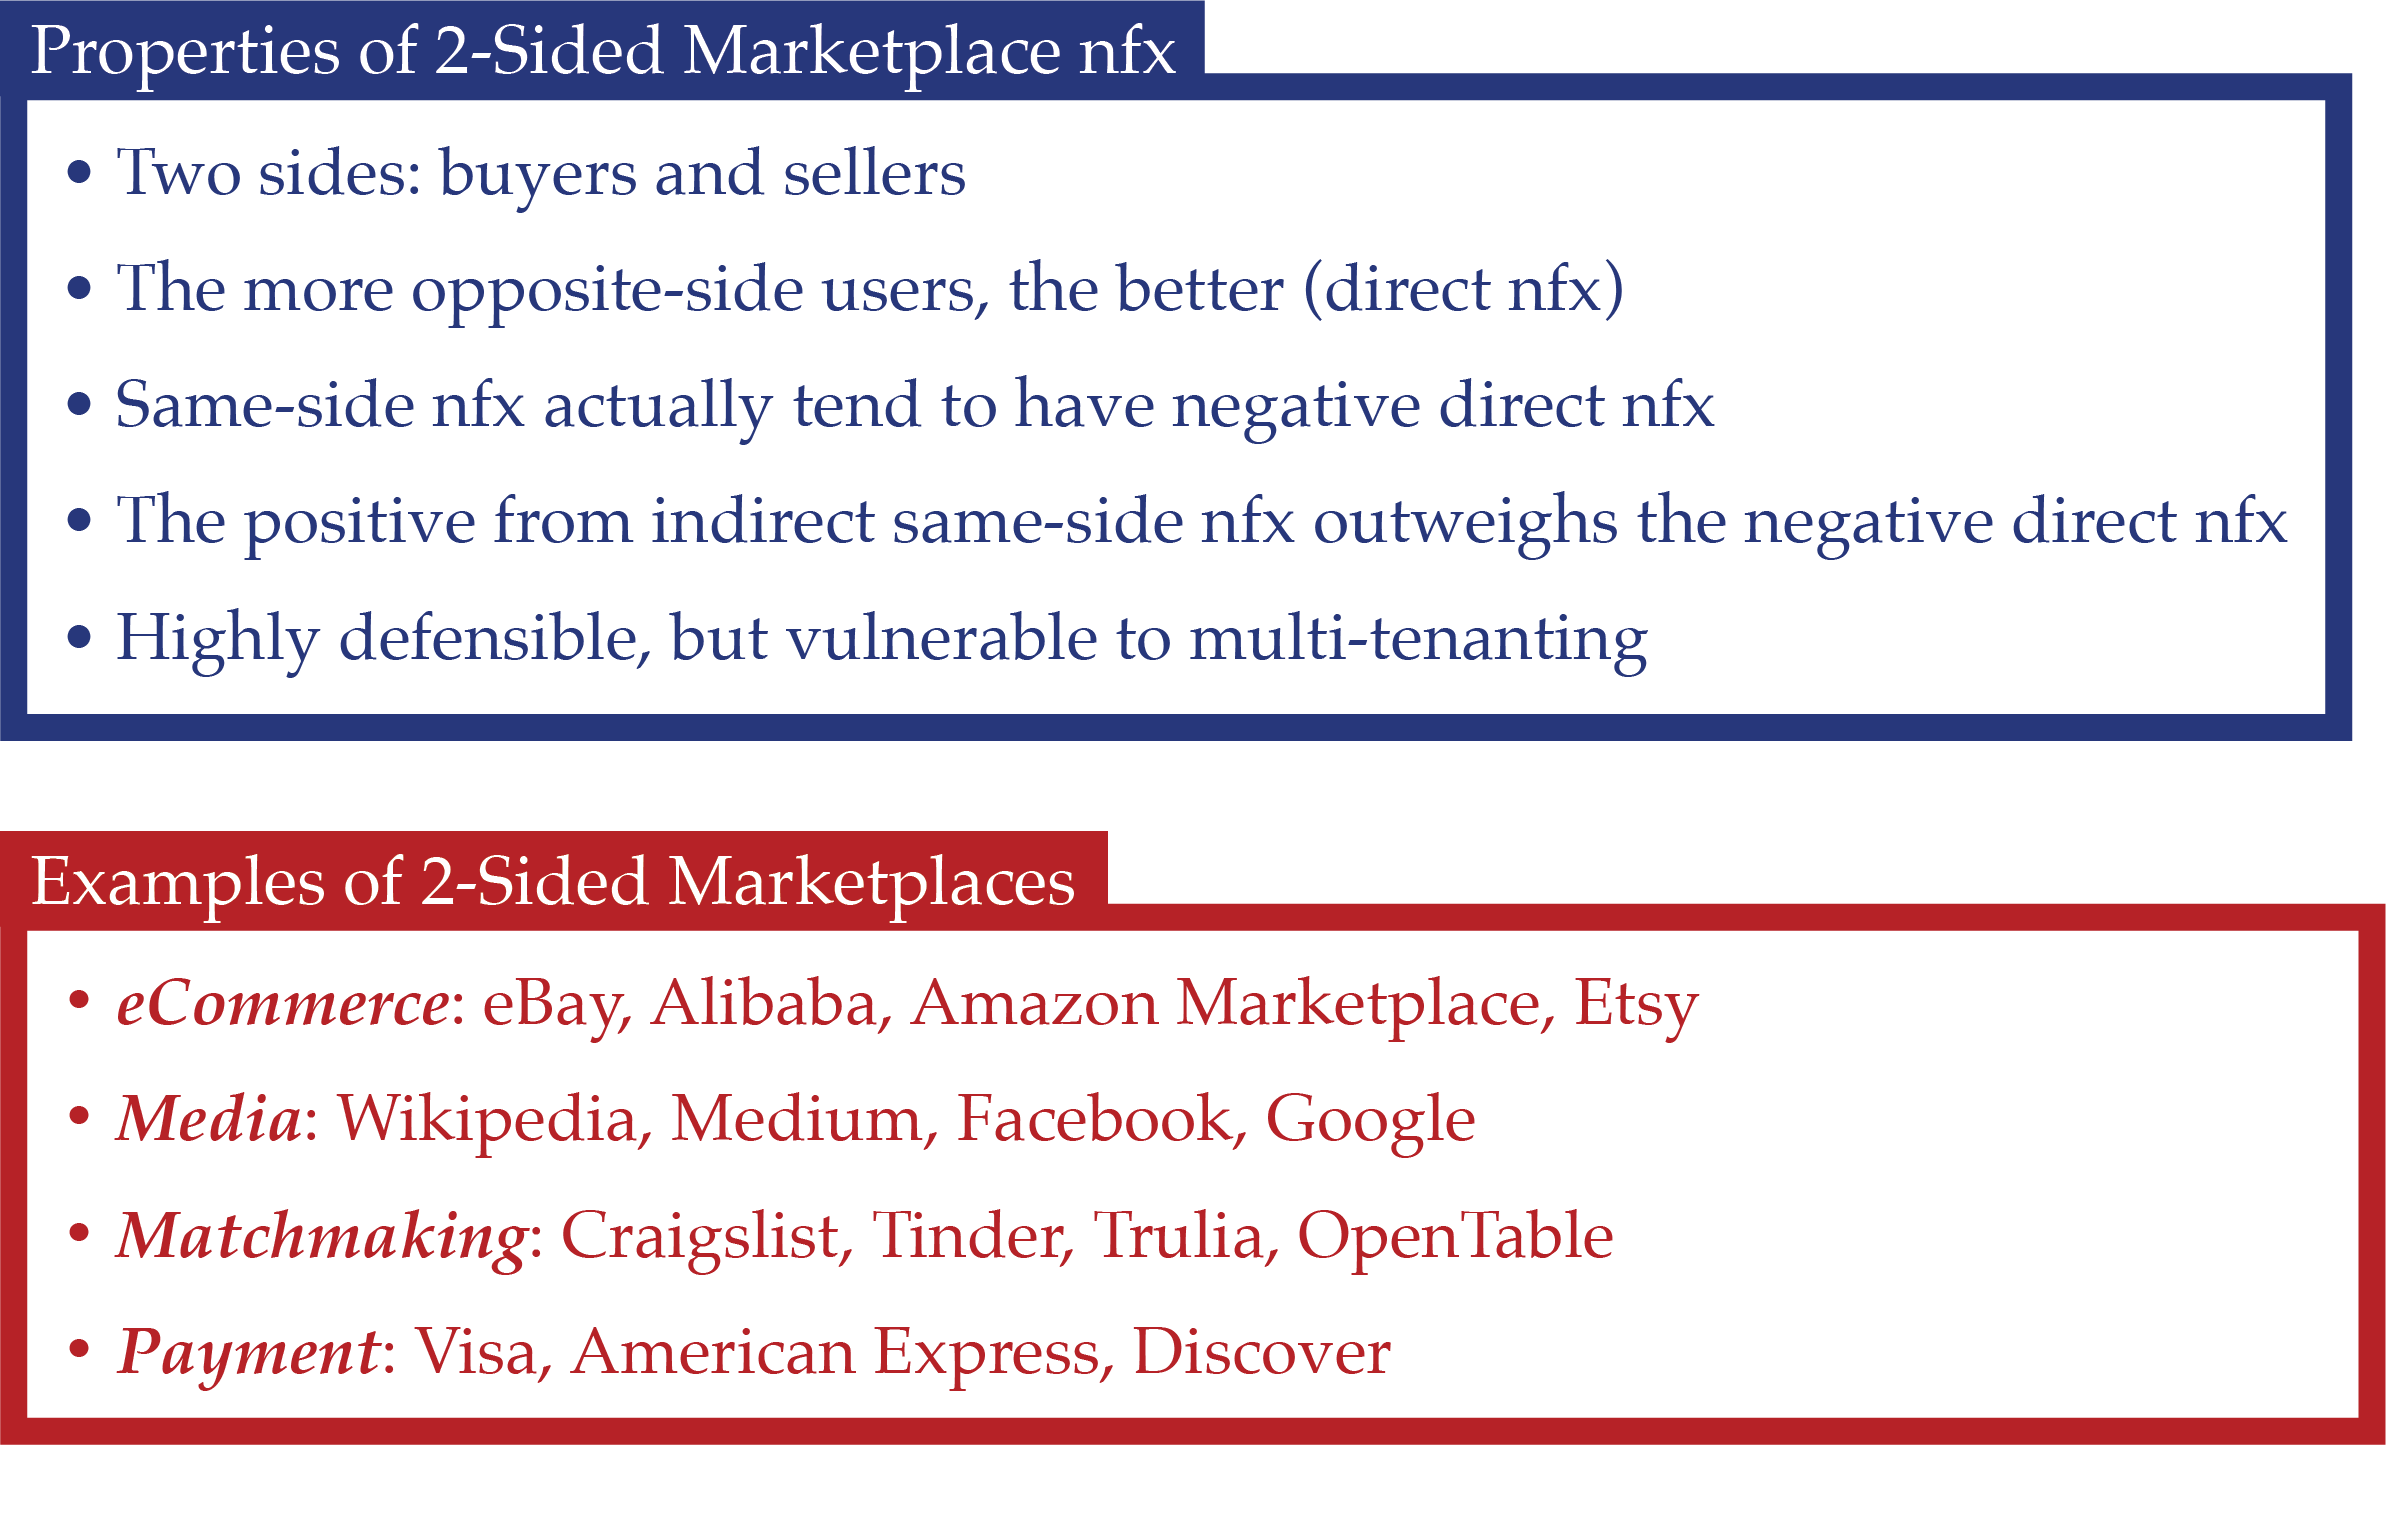 Properties and Example of Marketplace 2-sided